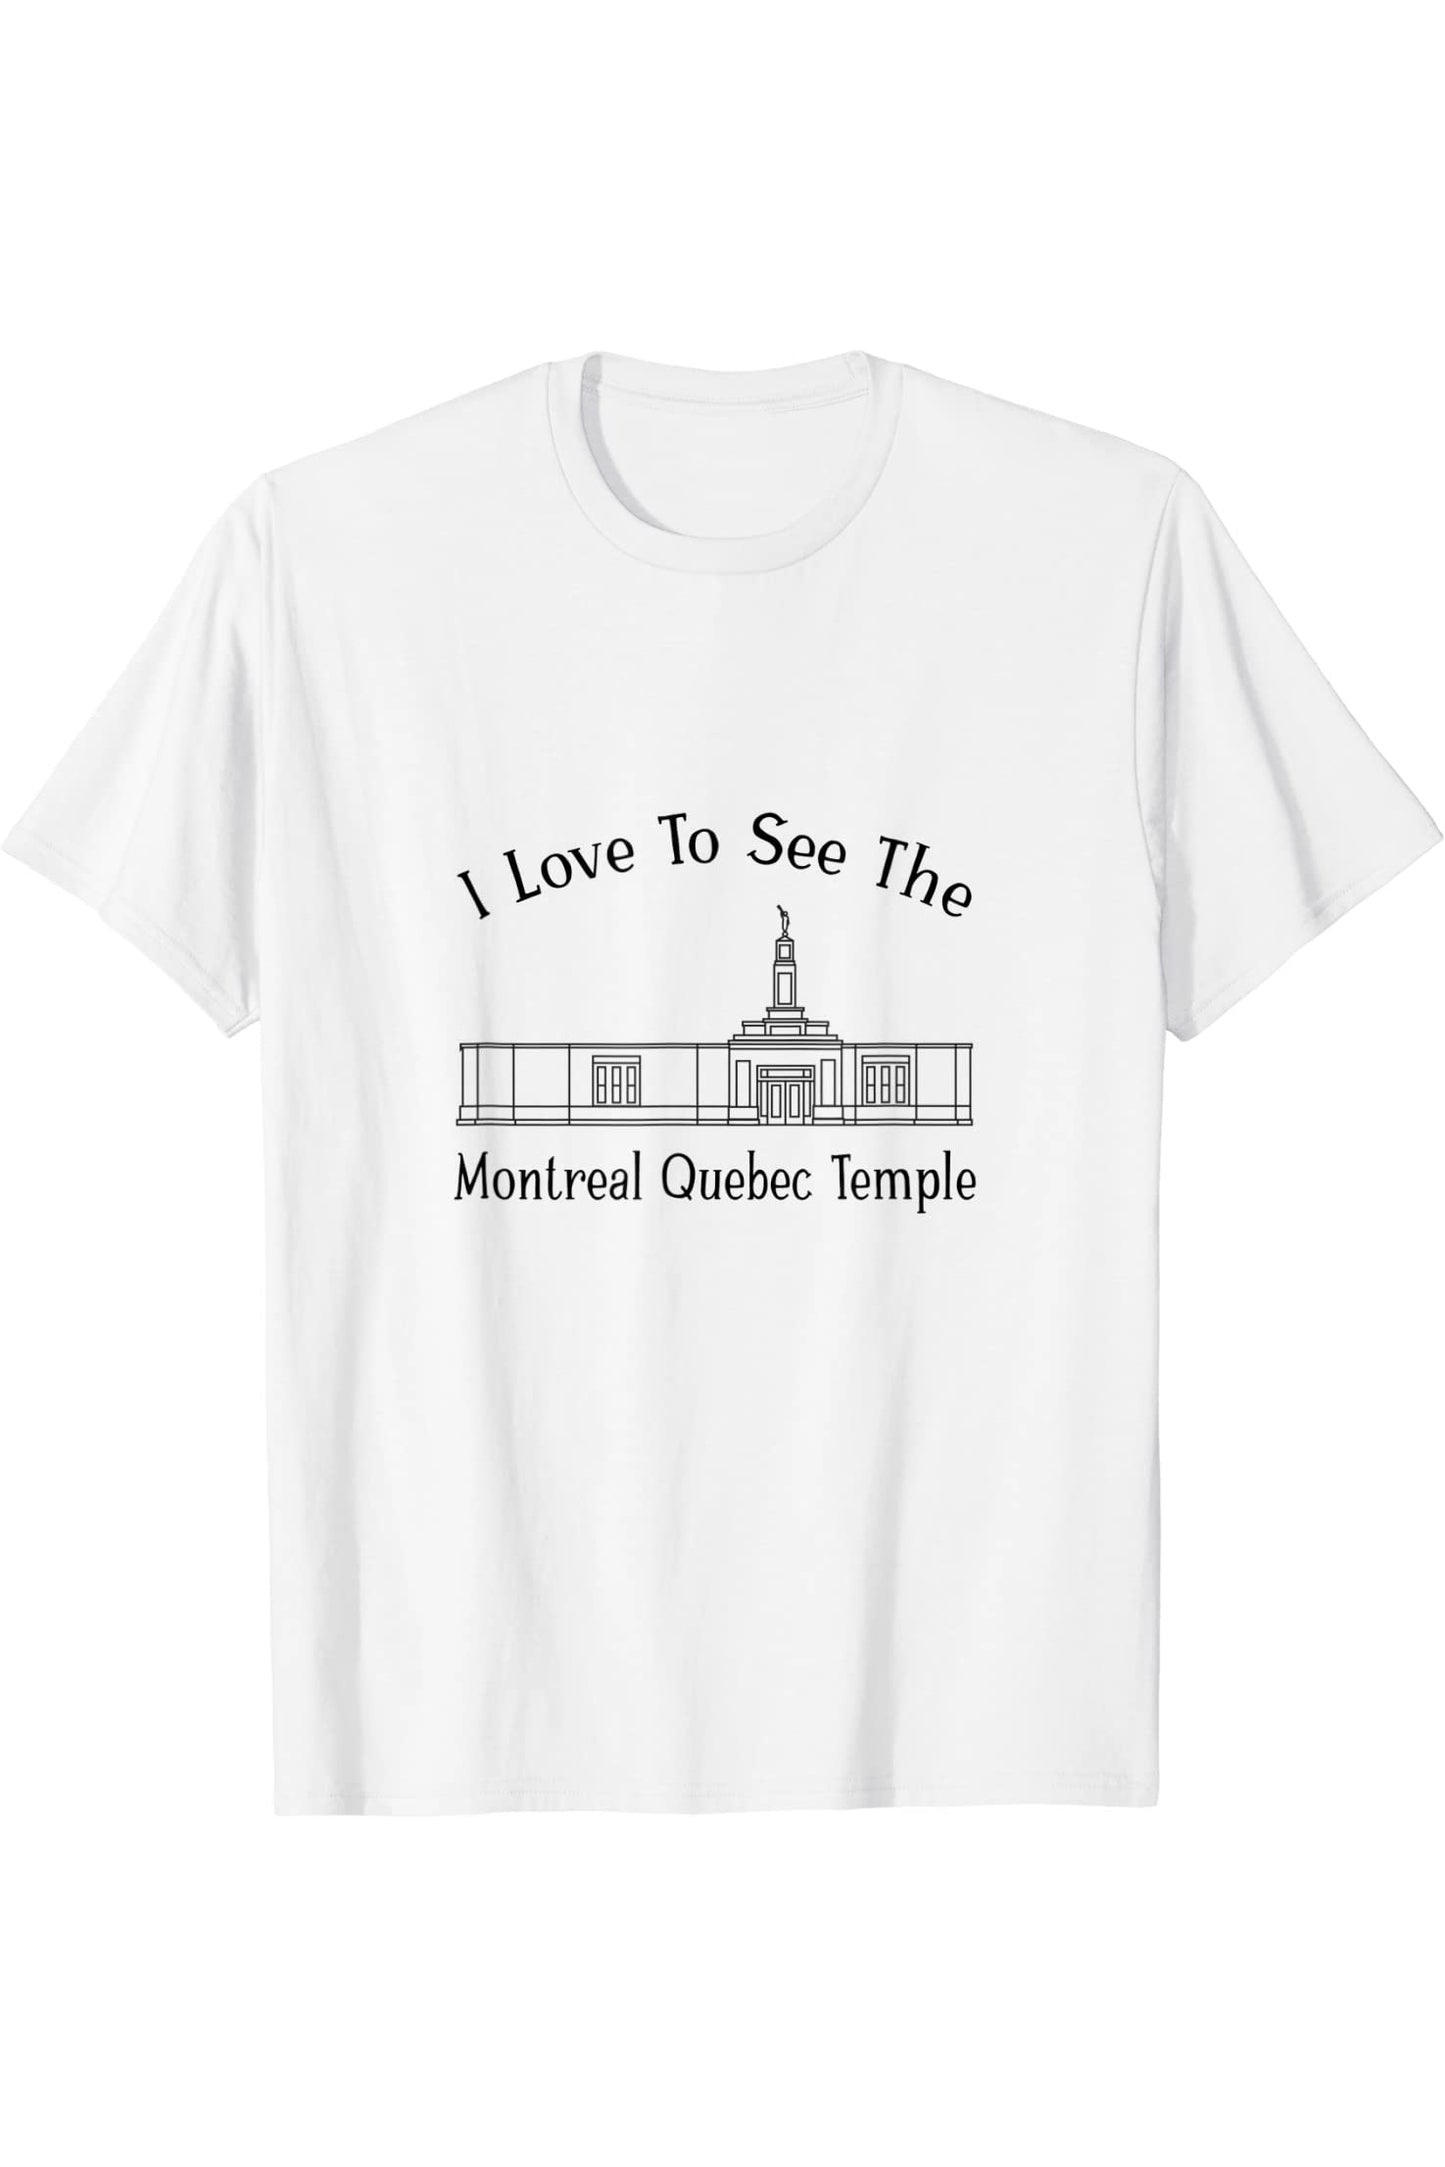 Montreal Quebec Temple T-Shirt - Happy Style (English) US